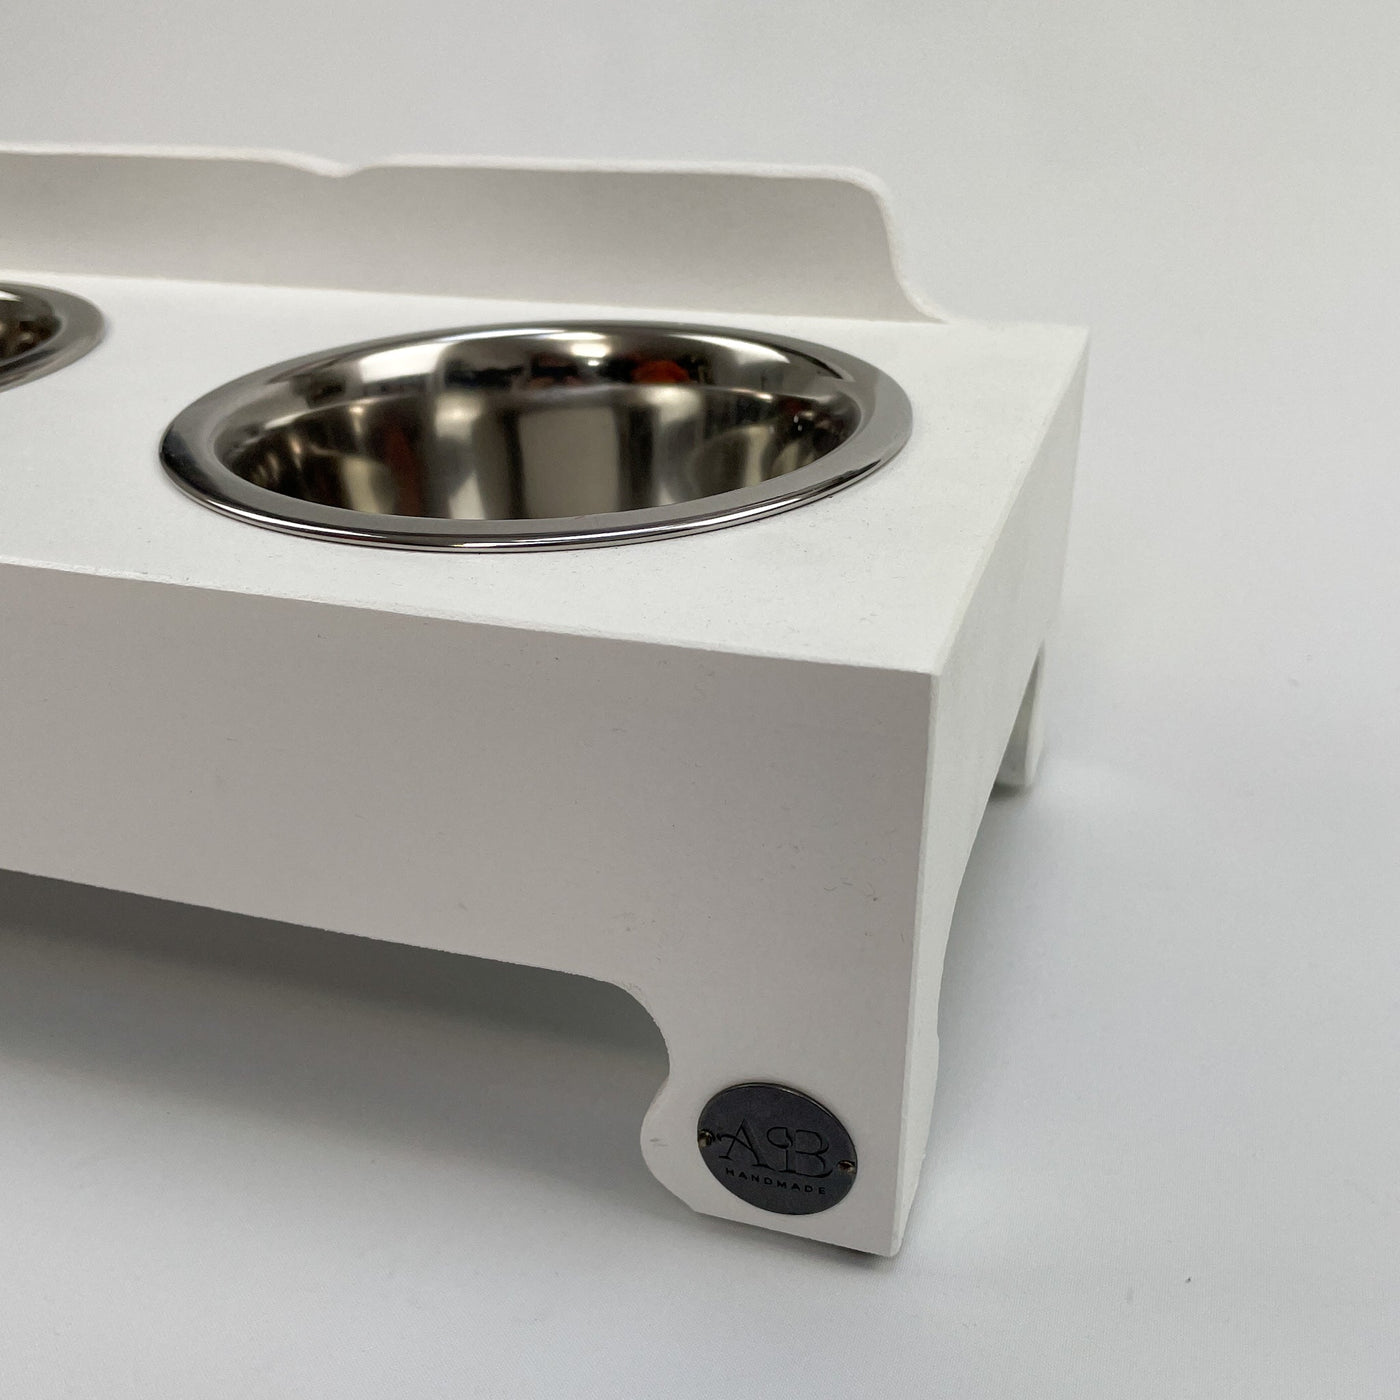 Stainless steel dog bowl in a white raised feeder stand.